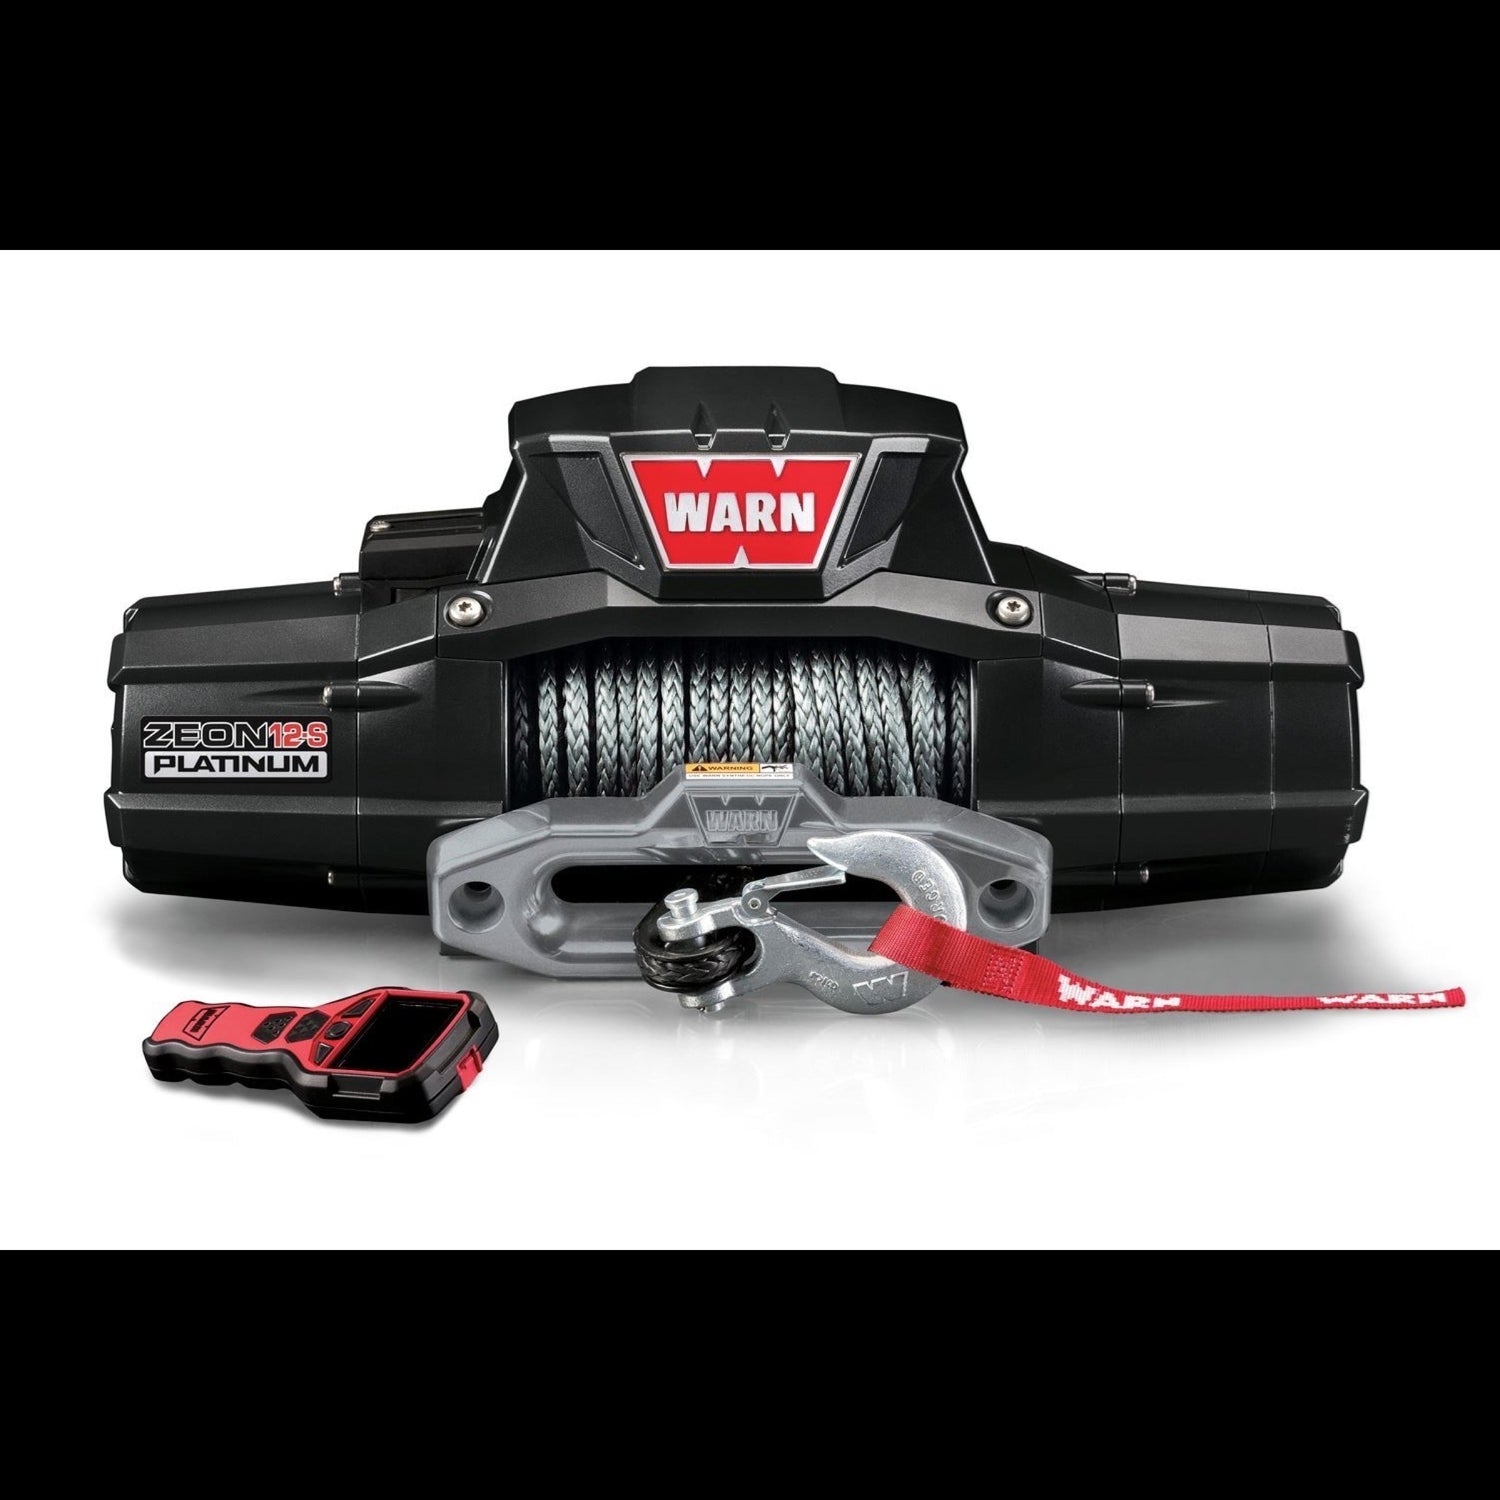 Warn Zeon platinum winch black color with nylon rope